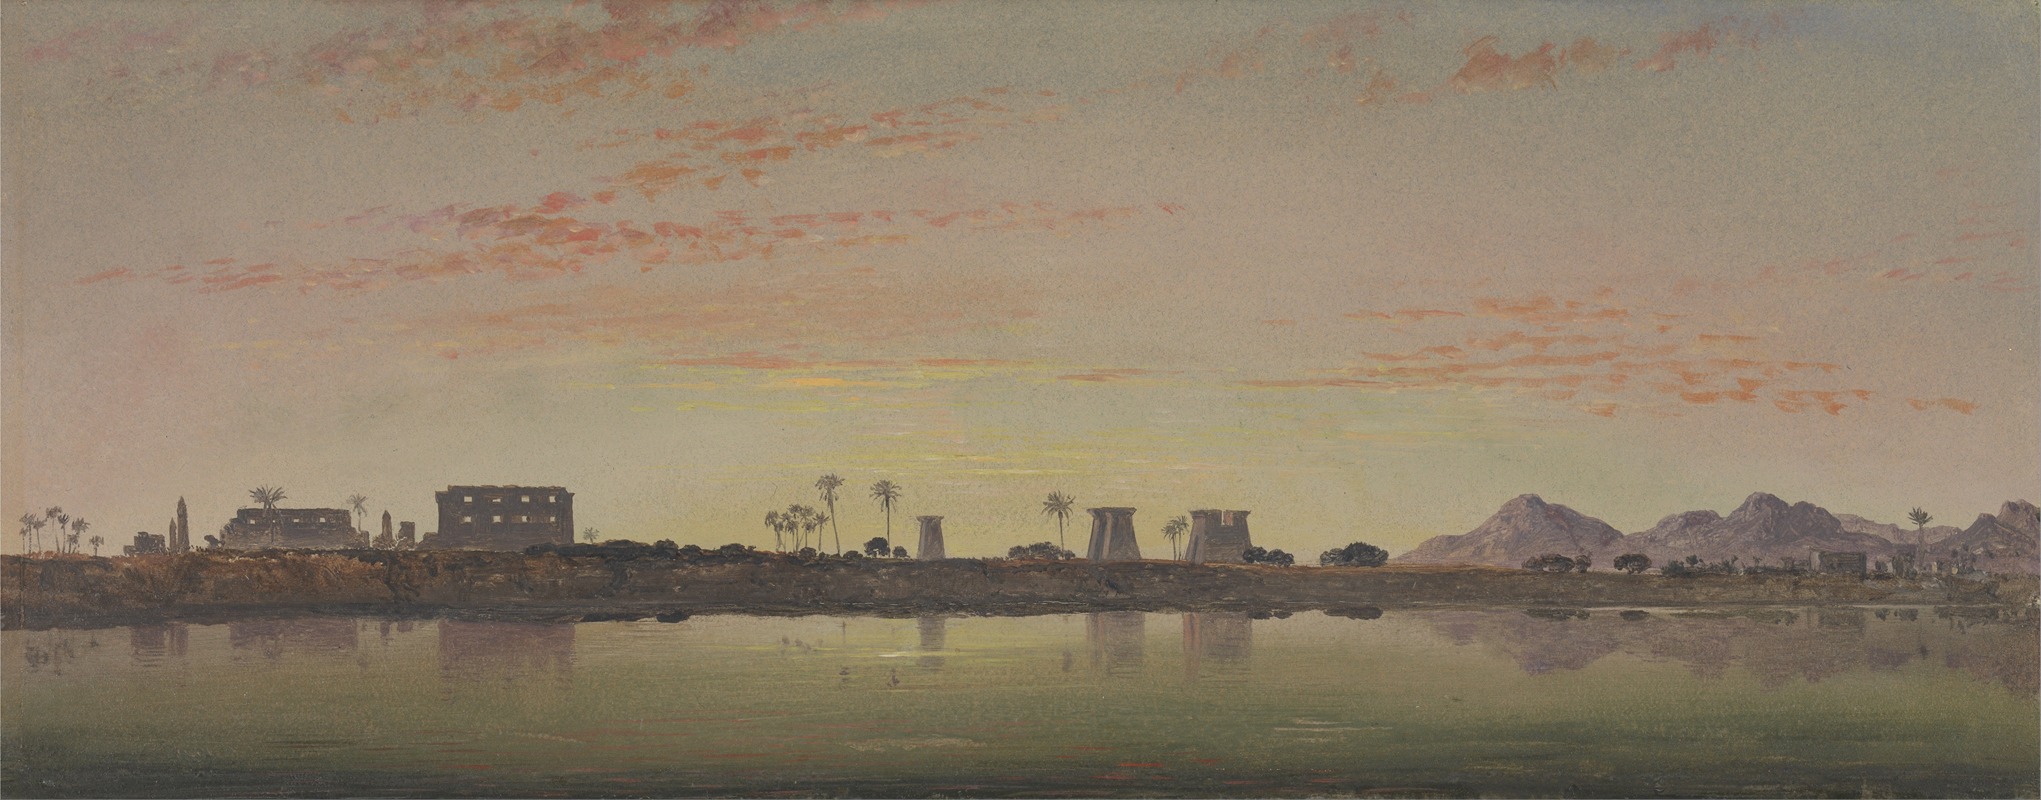 Edward William Cooke - Pylons at Karnak, the Theban Mountains in the Distance